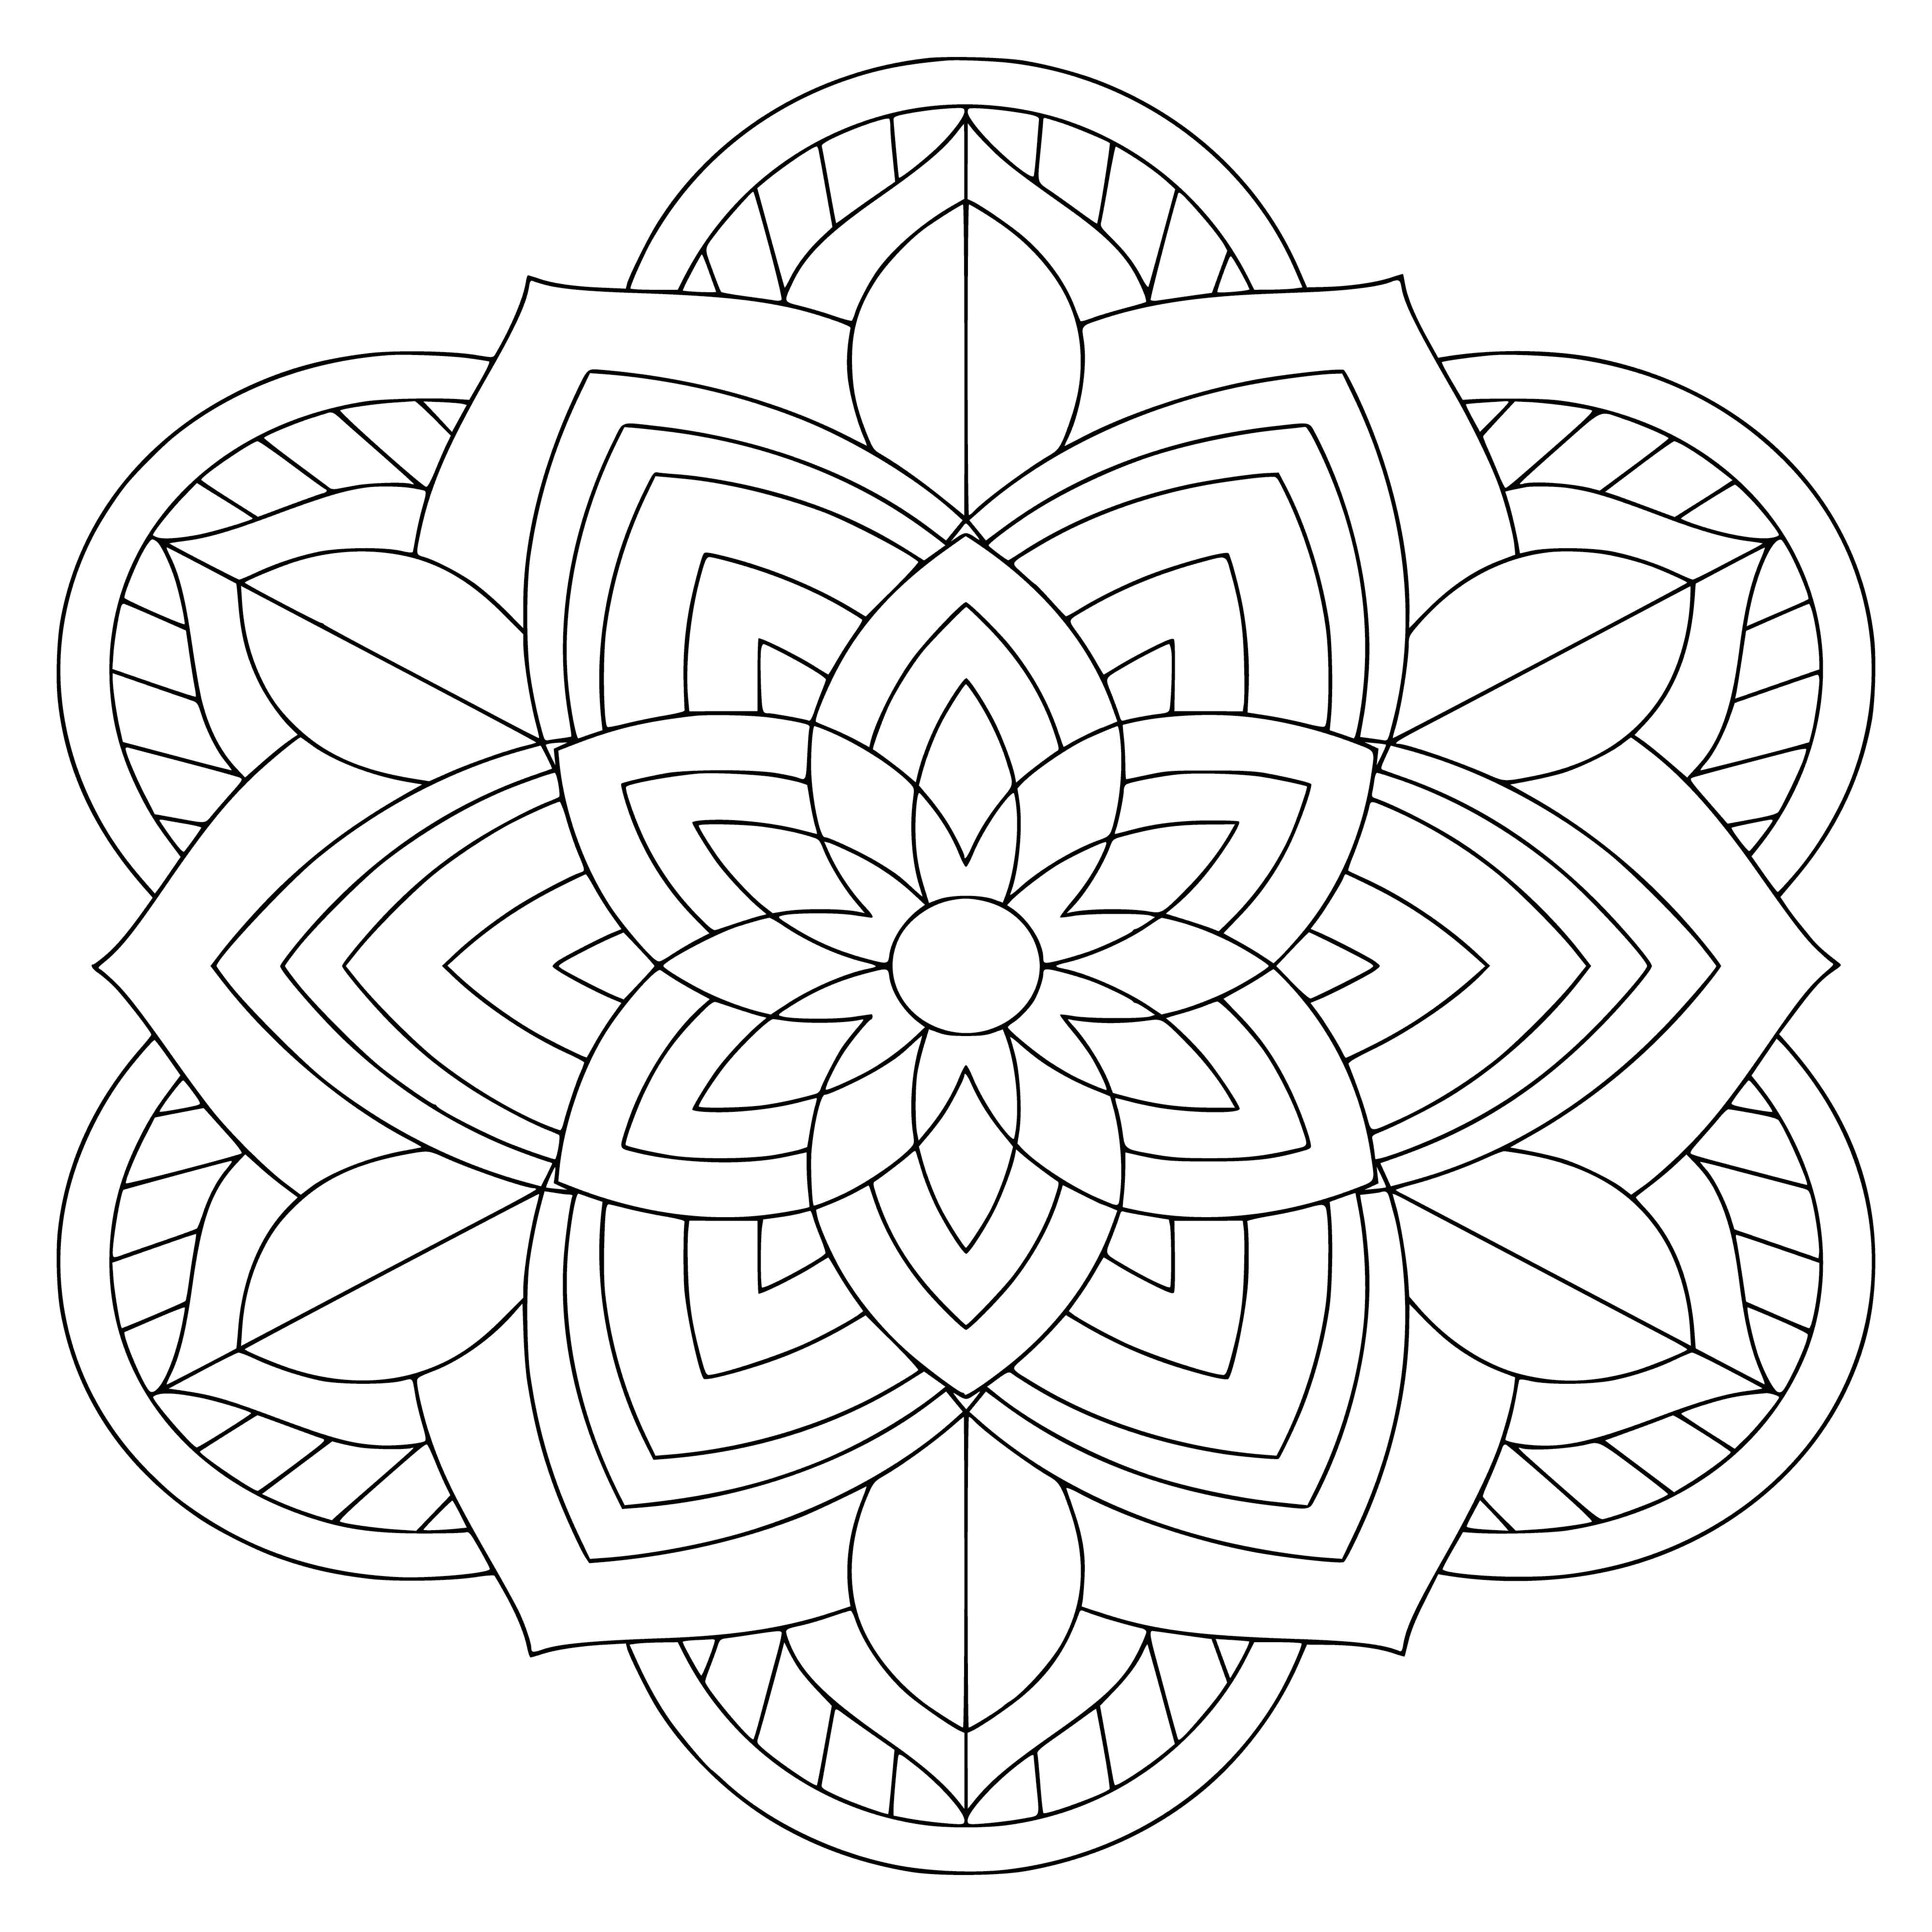 coloring page: Mandala with flower in center; petals are different colors & patterns; around flower are geometric & organic designs. #art